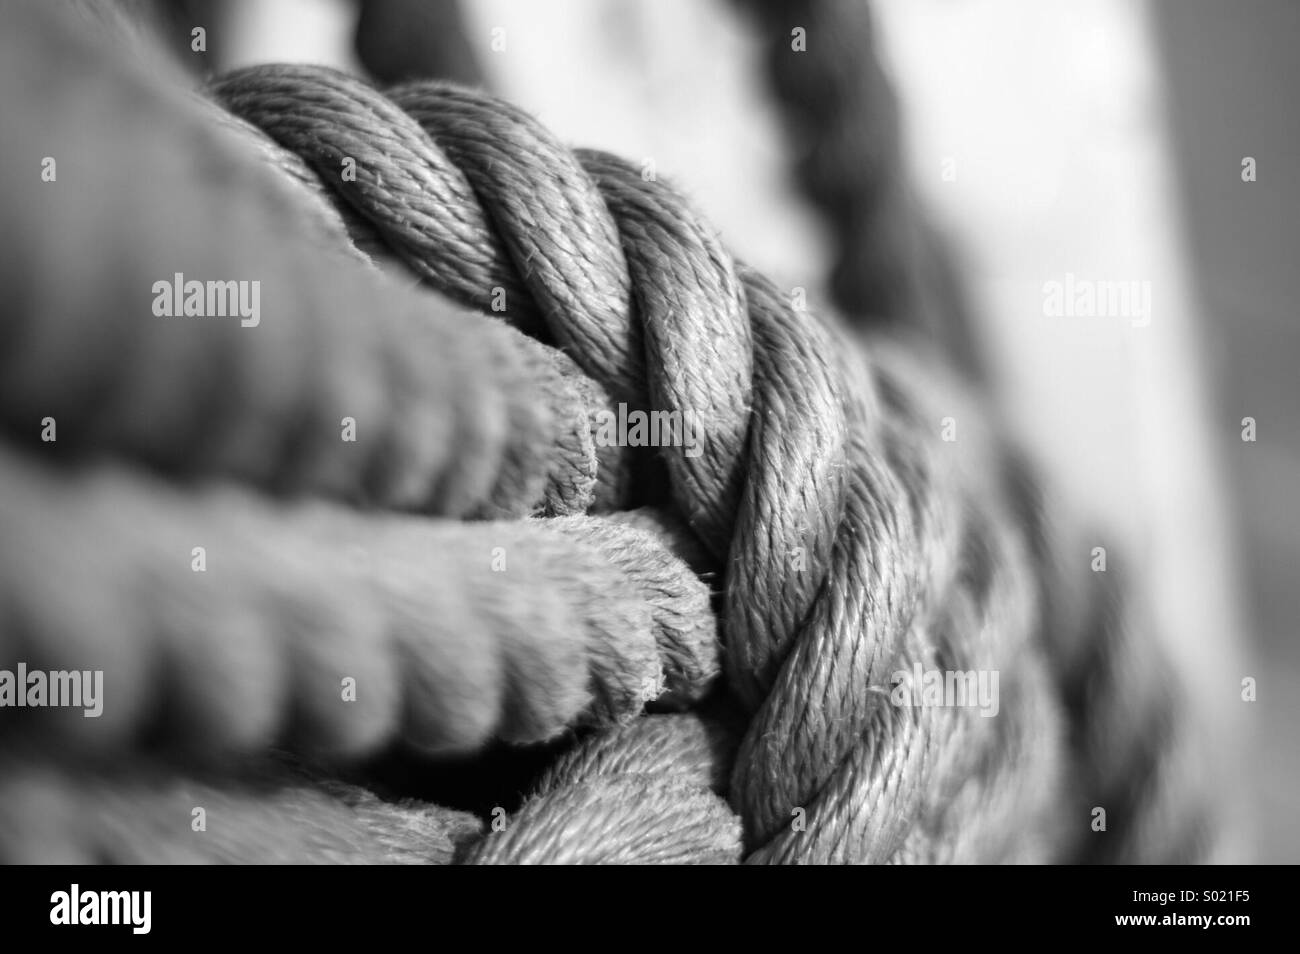 Rope Banque D'Images